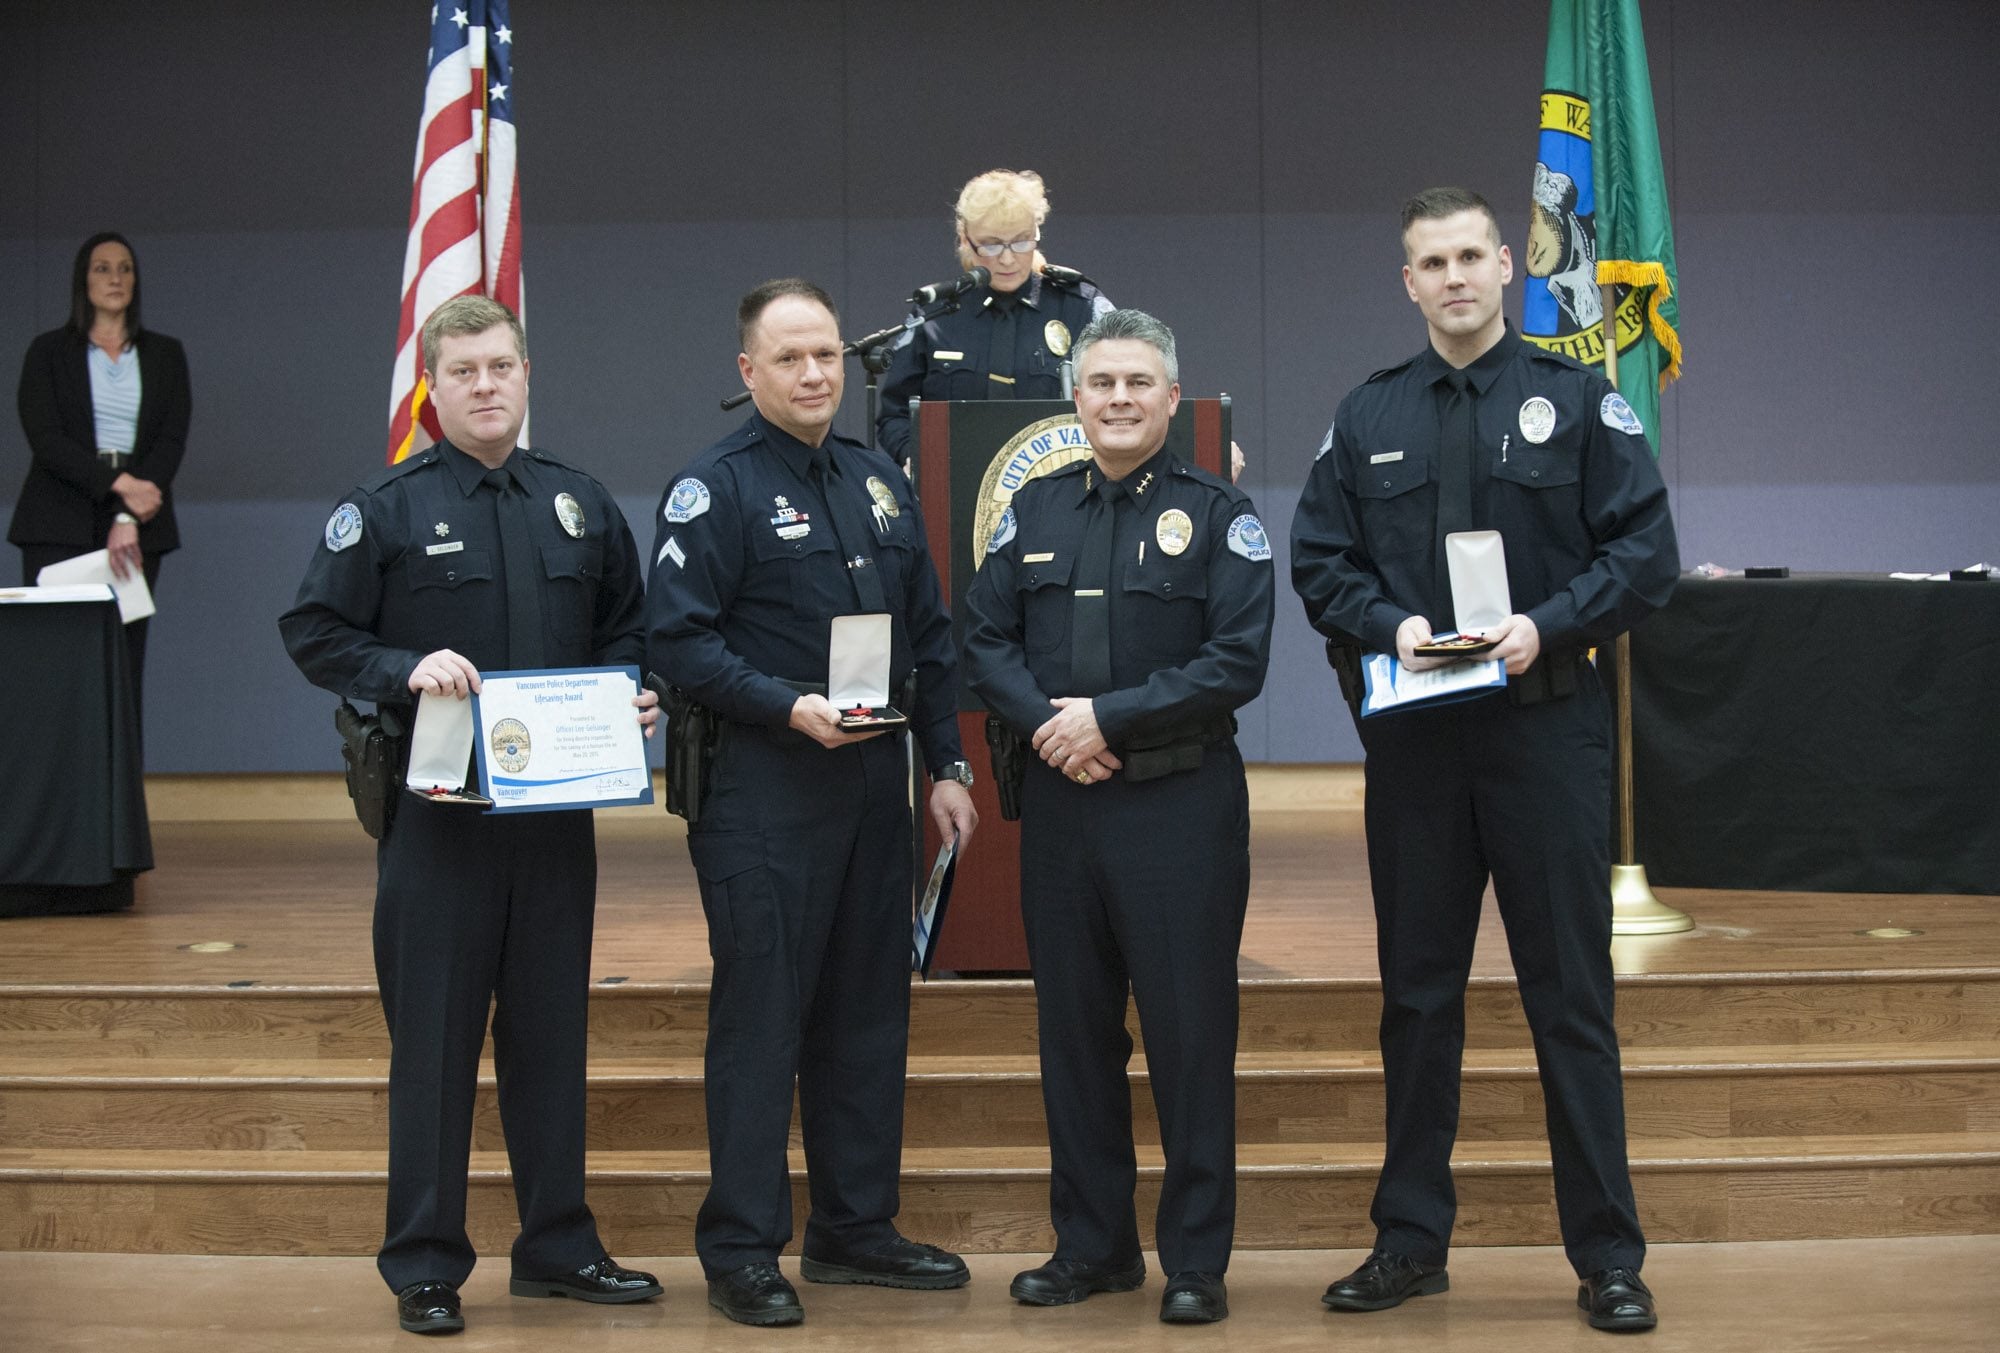 Officer Lee Gelsinger, from left, receives the Vancouver Police Department&#039;s Lifesaving Award on Tuesday night from Chief James McElvain; Cpl. Drue Russell and Officer Christopher Douville also received the award.